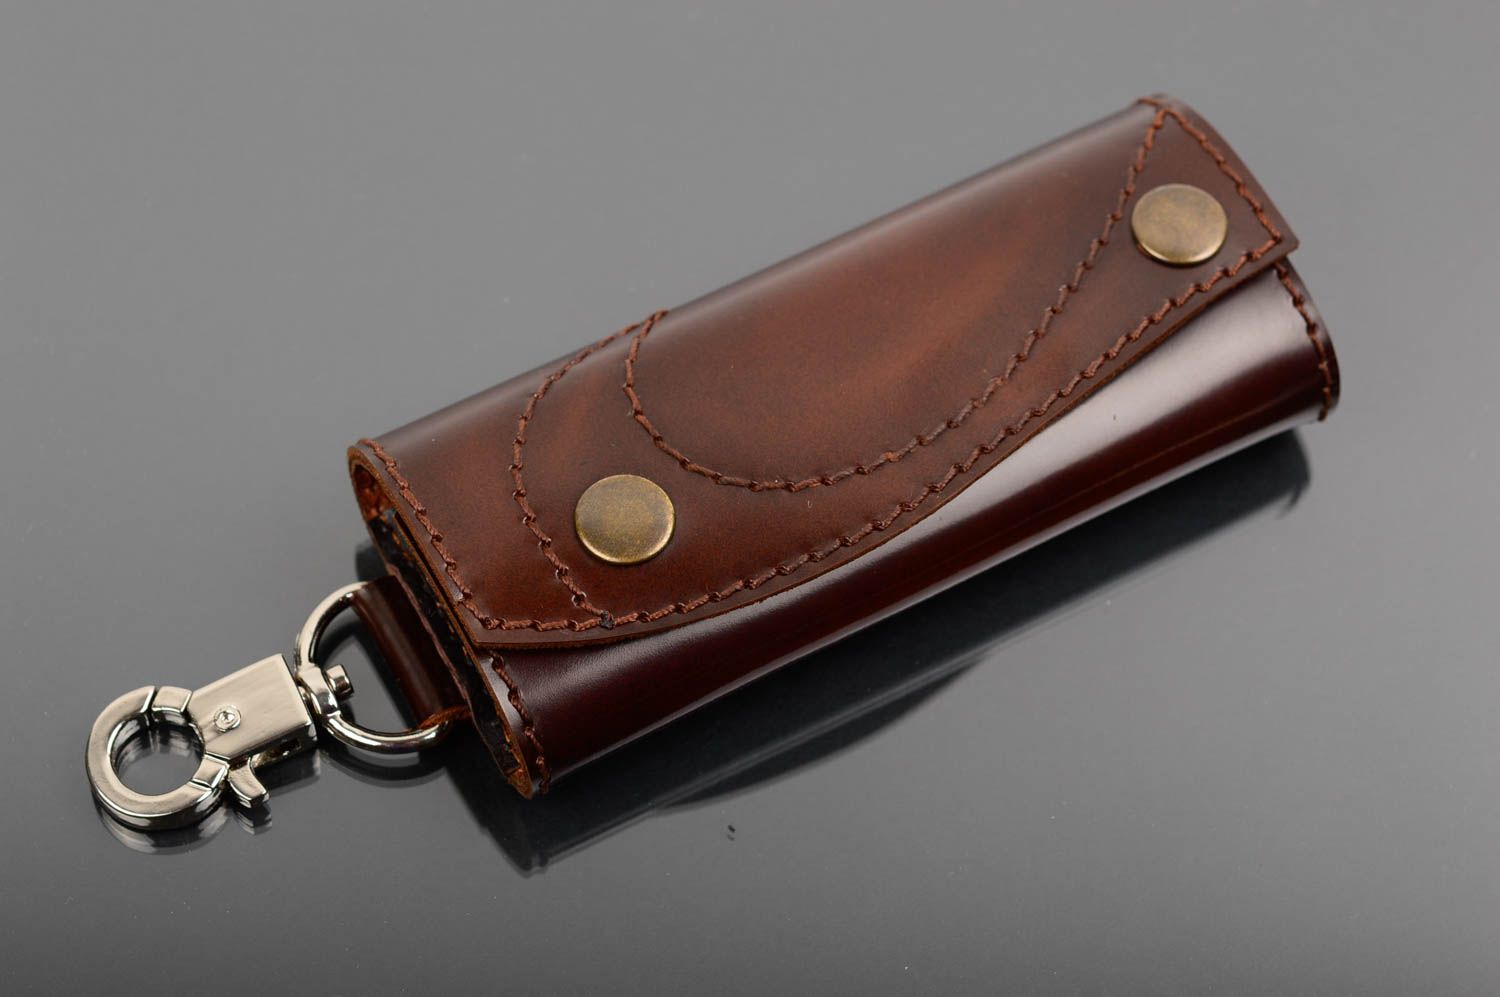 Unusual handmade genuine leather key case fashion accessories leather goods photo 1